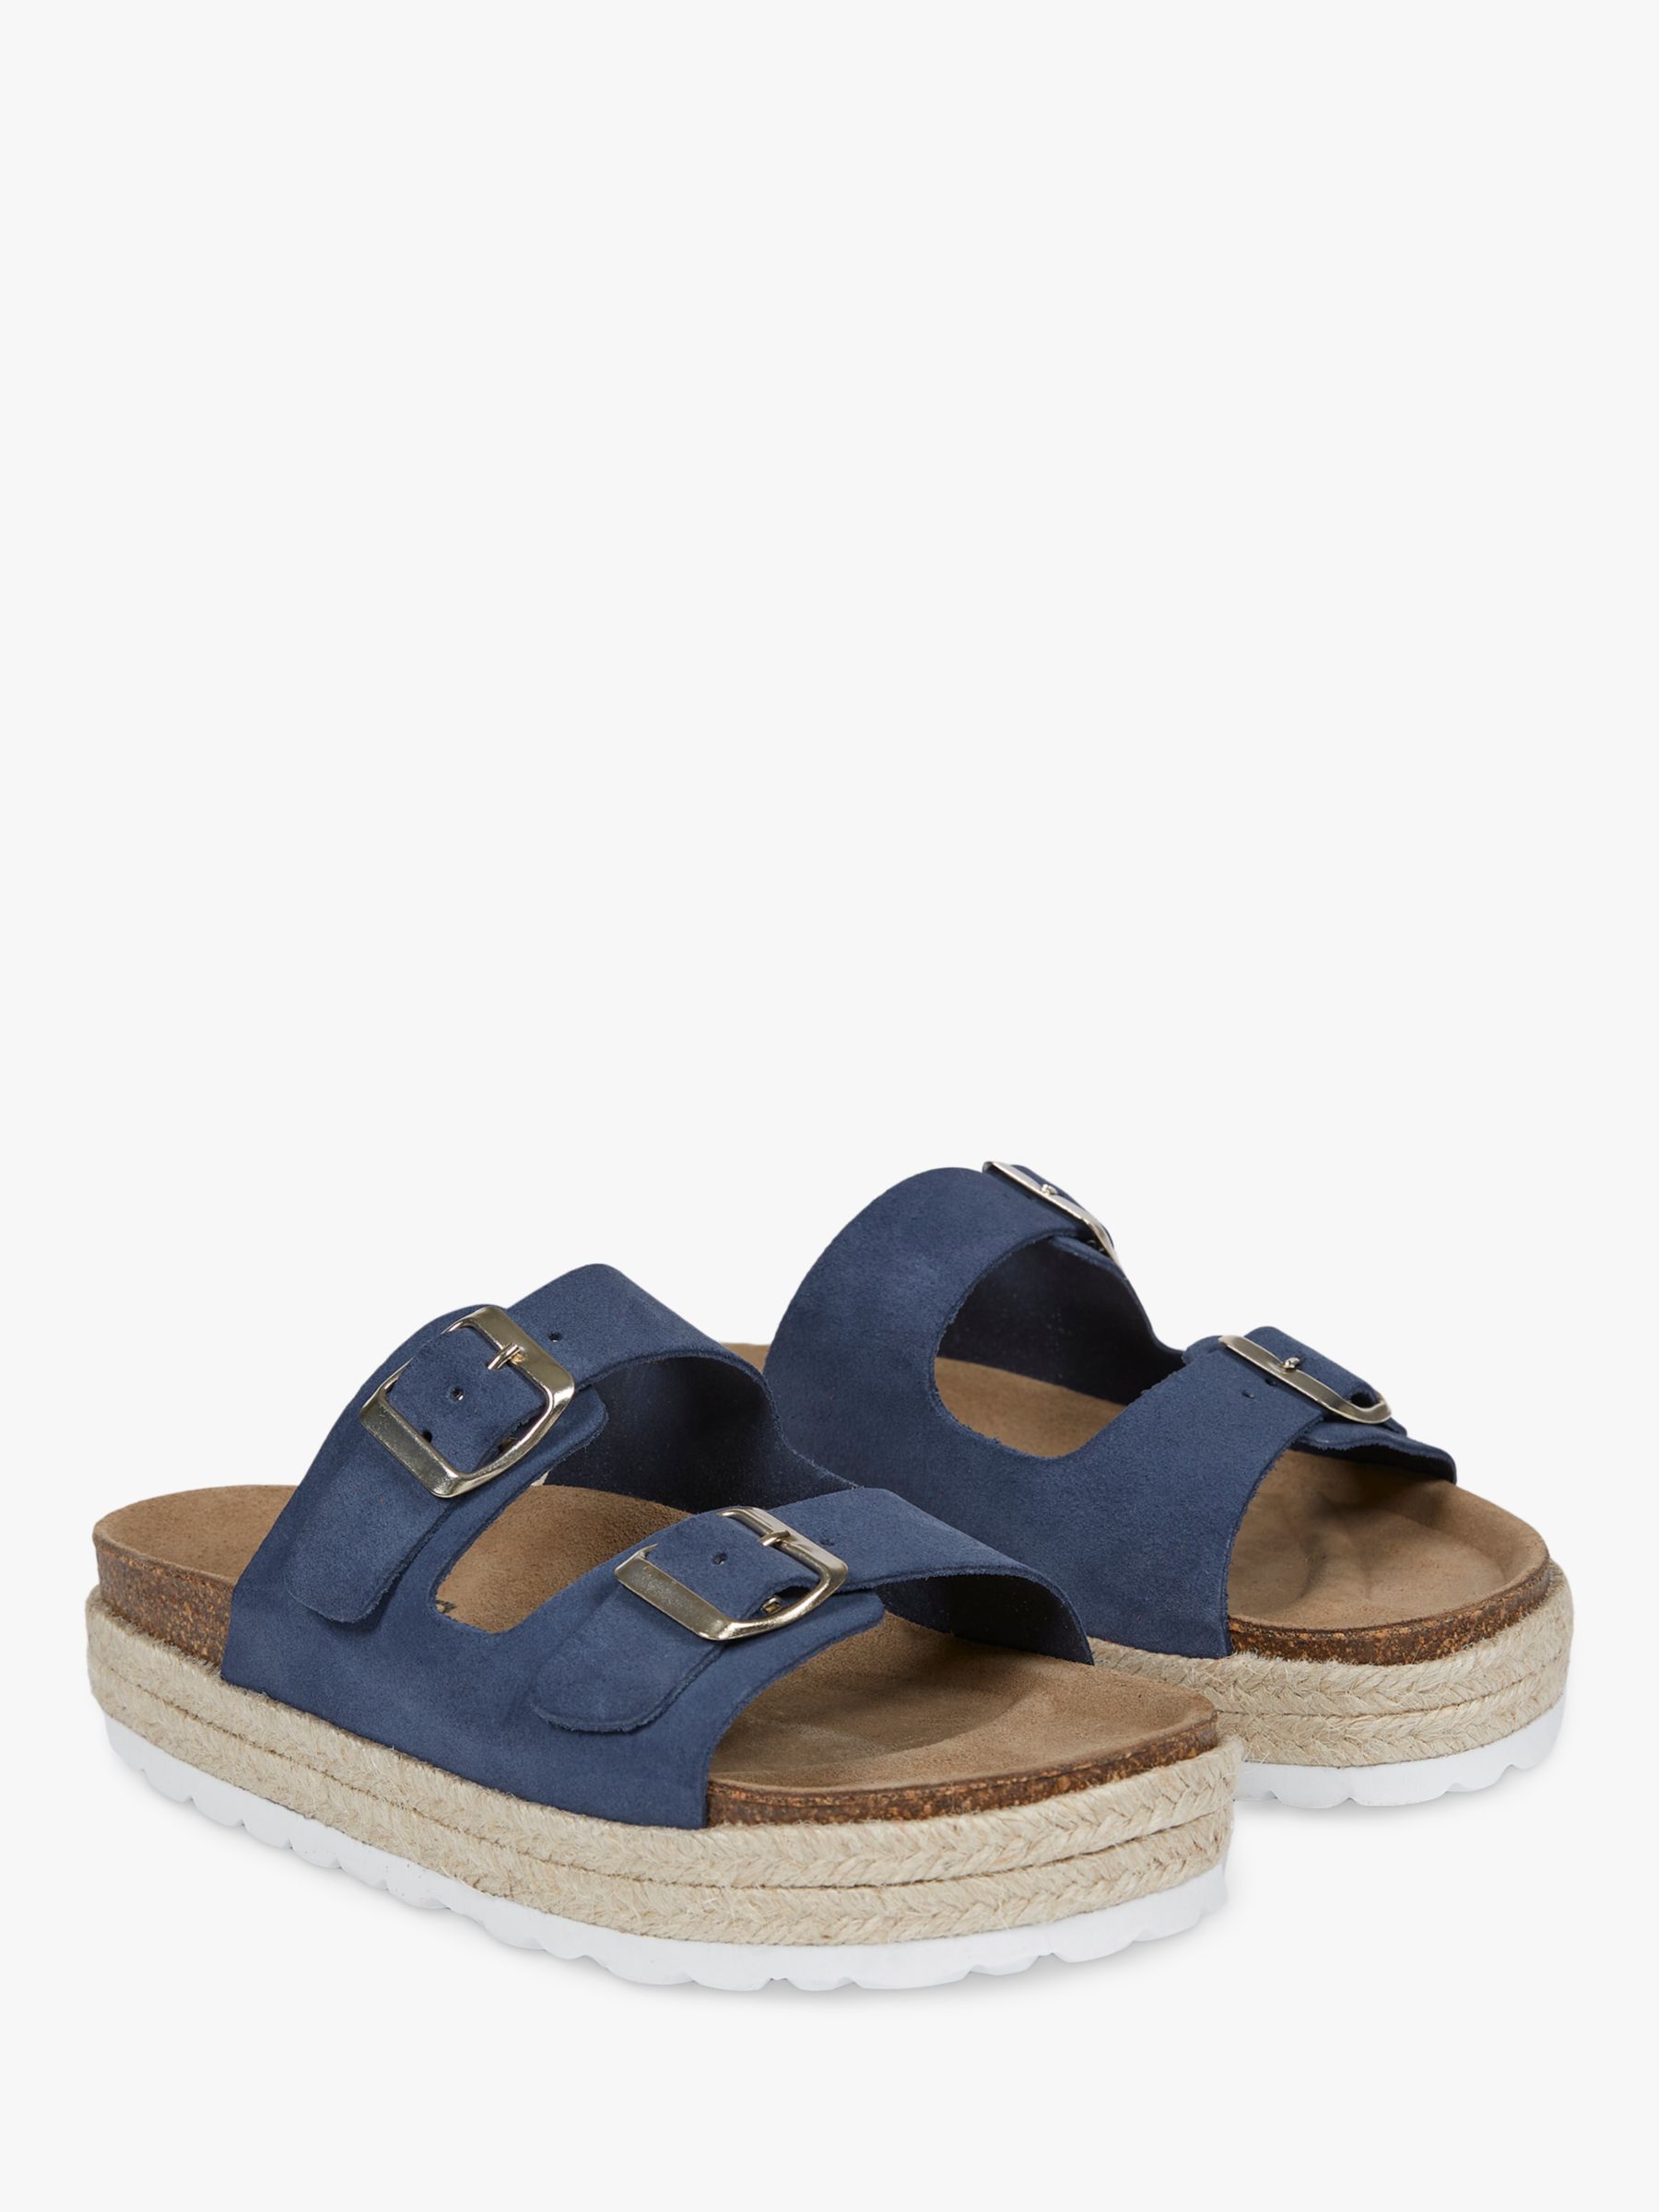 Celtic & Co. Double Buckle Suede Sliders, Indigo at John Lewis & Partners